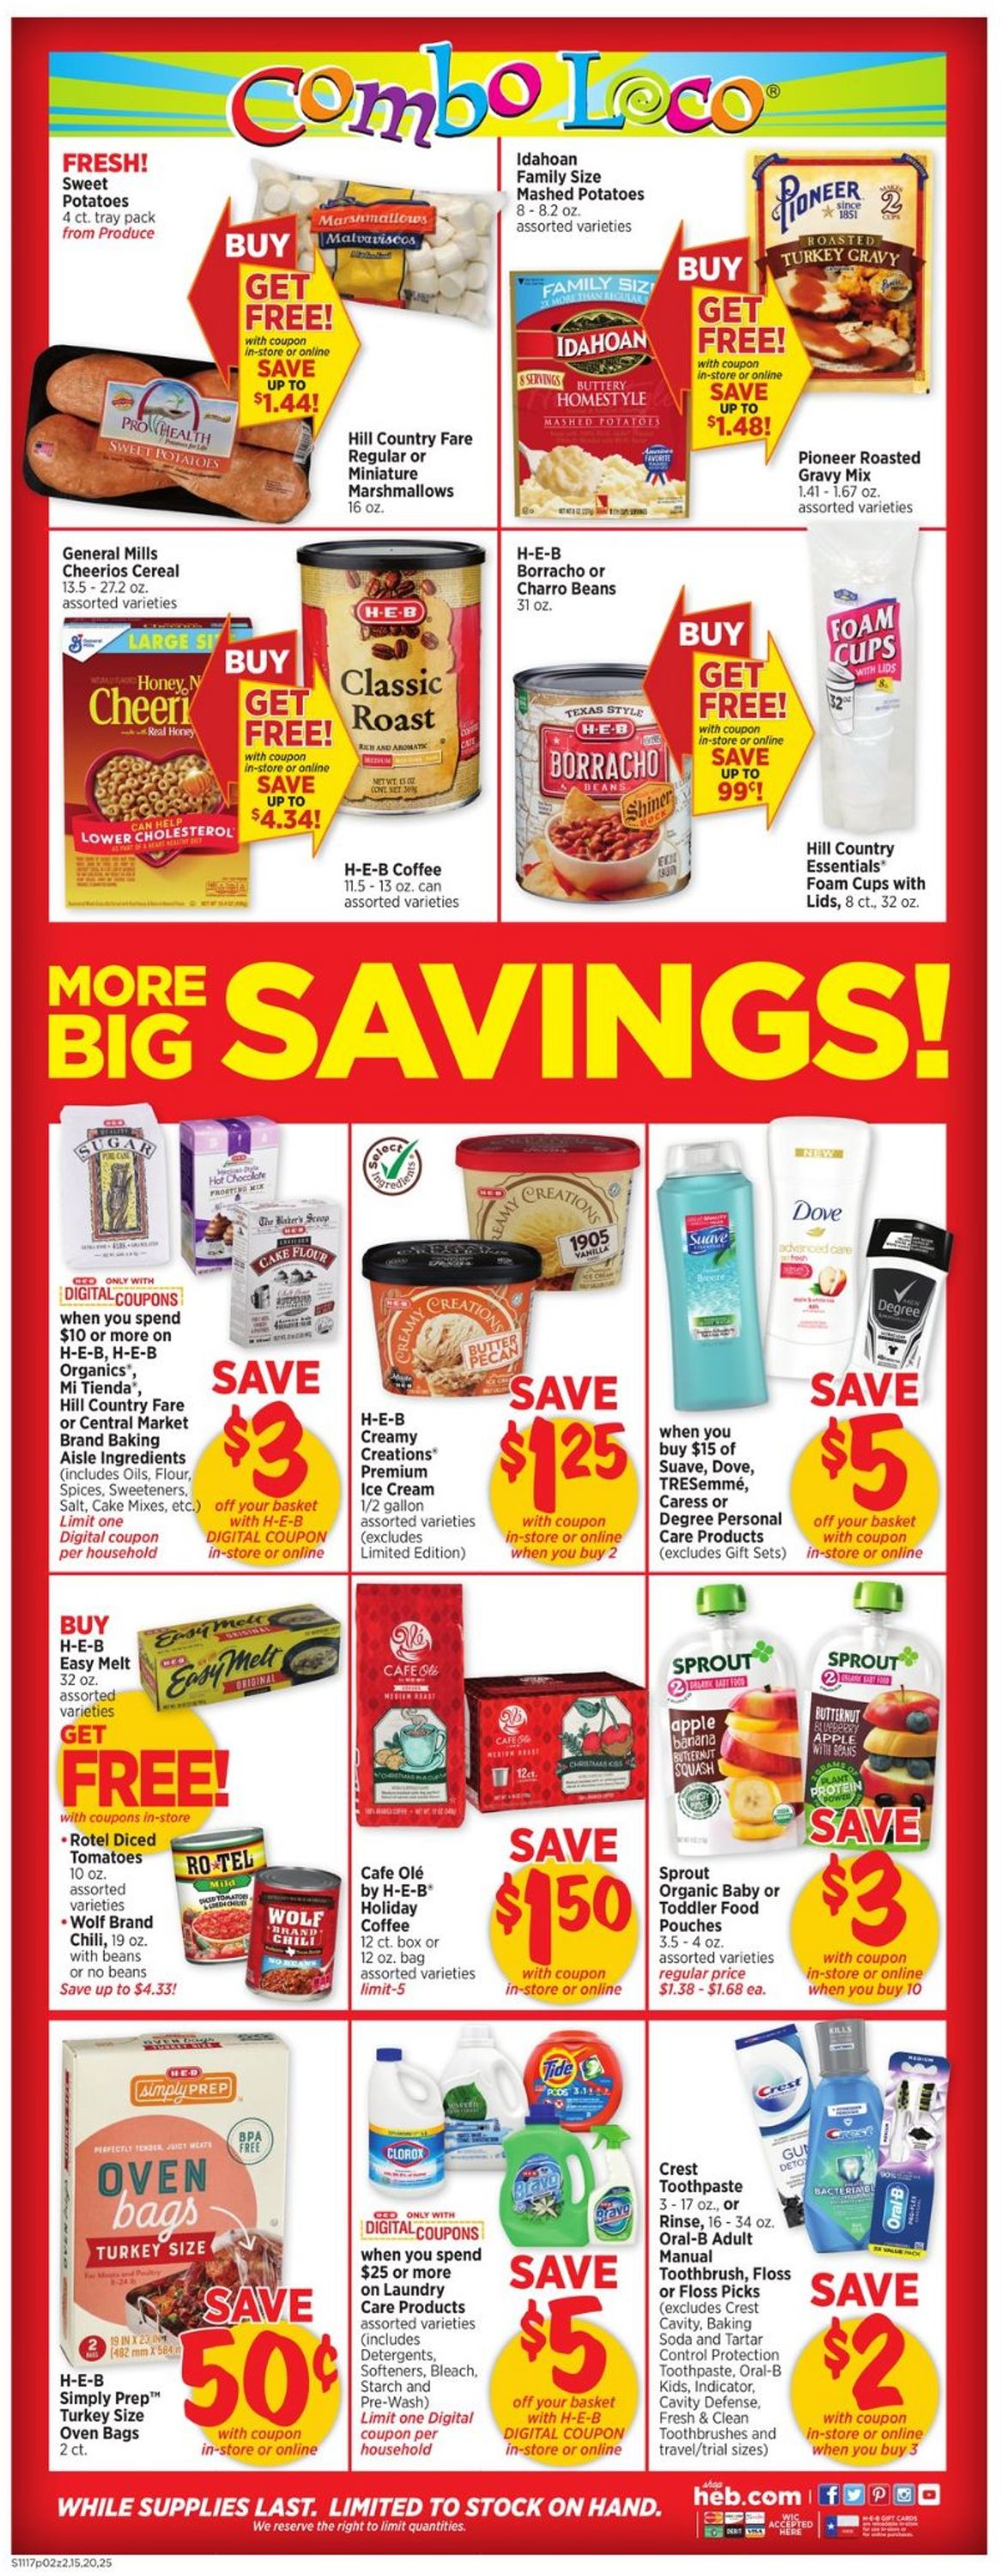 Catalogue H-E-B THANKSGIVING 2021 from 11/17/2021